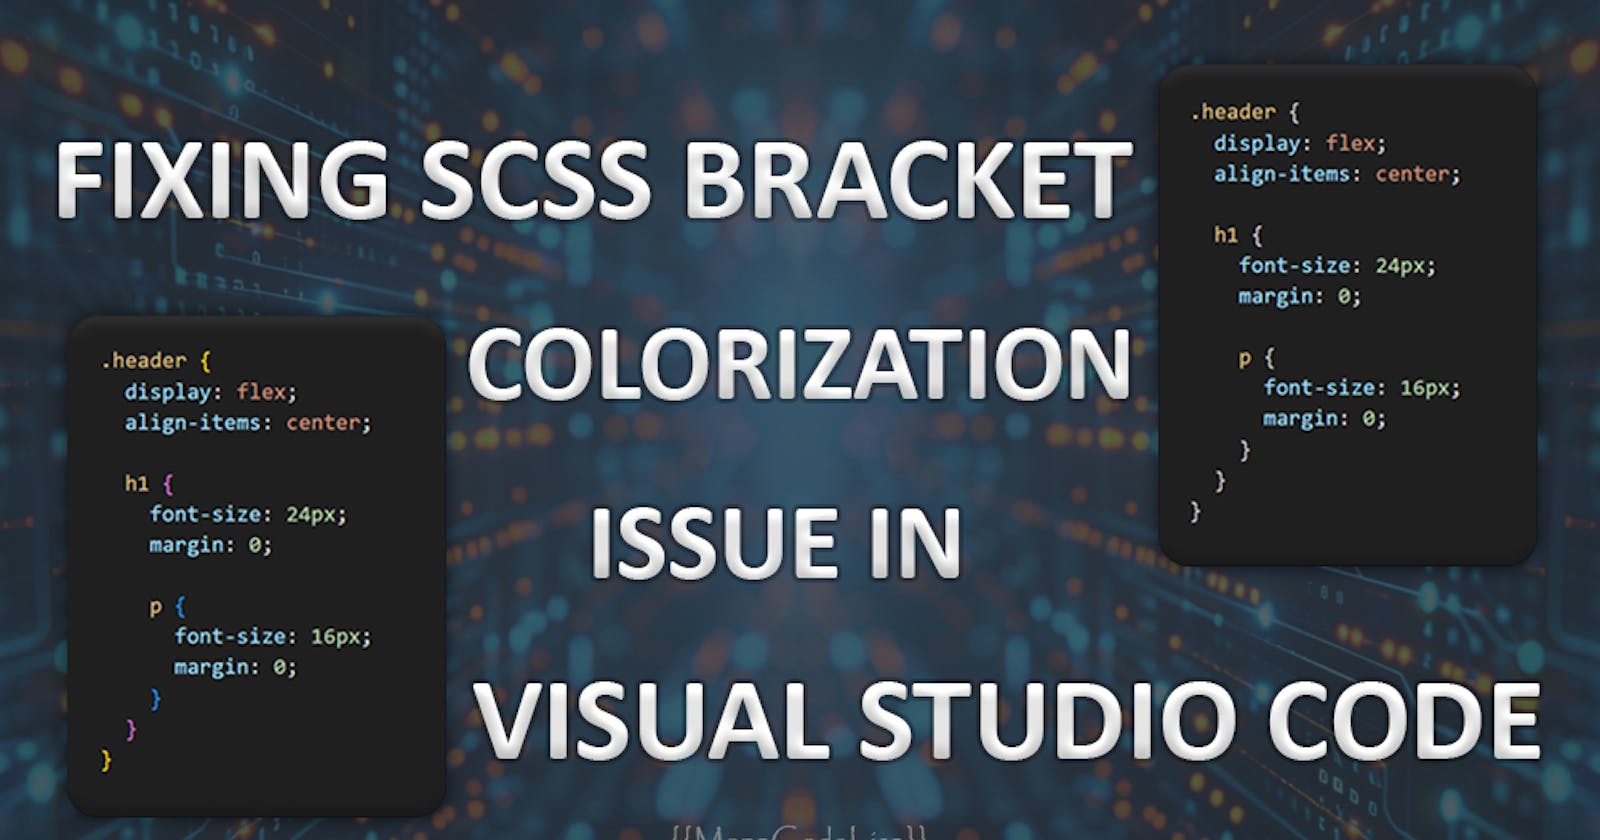 Fixing SCSS Bracket Colorization Issue in Visual Studio Code